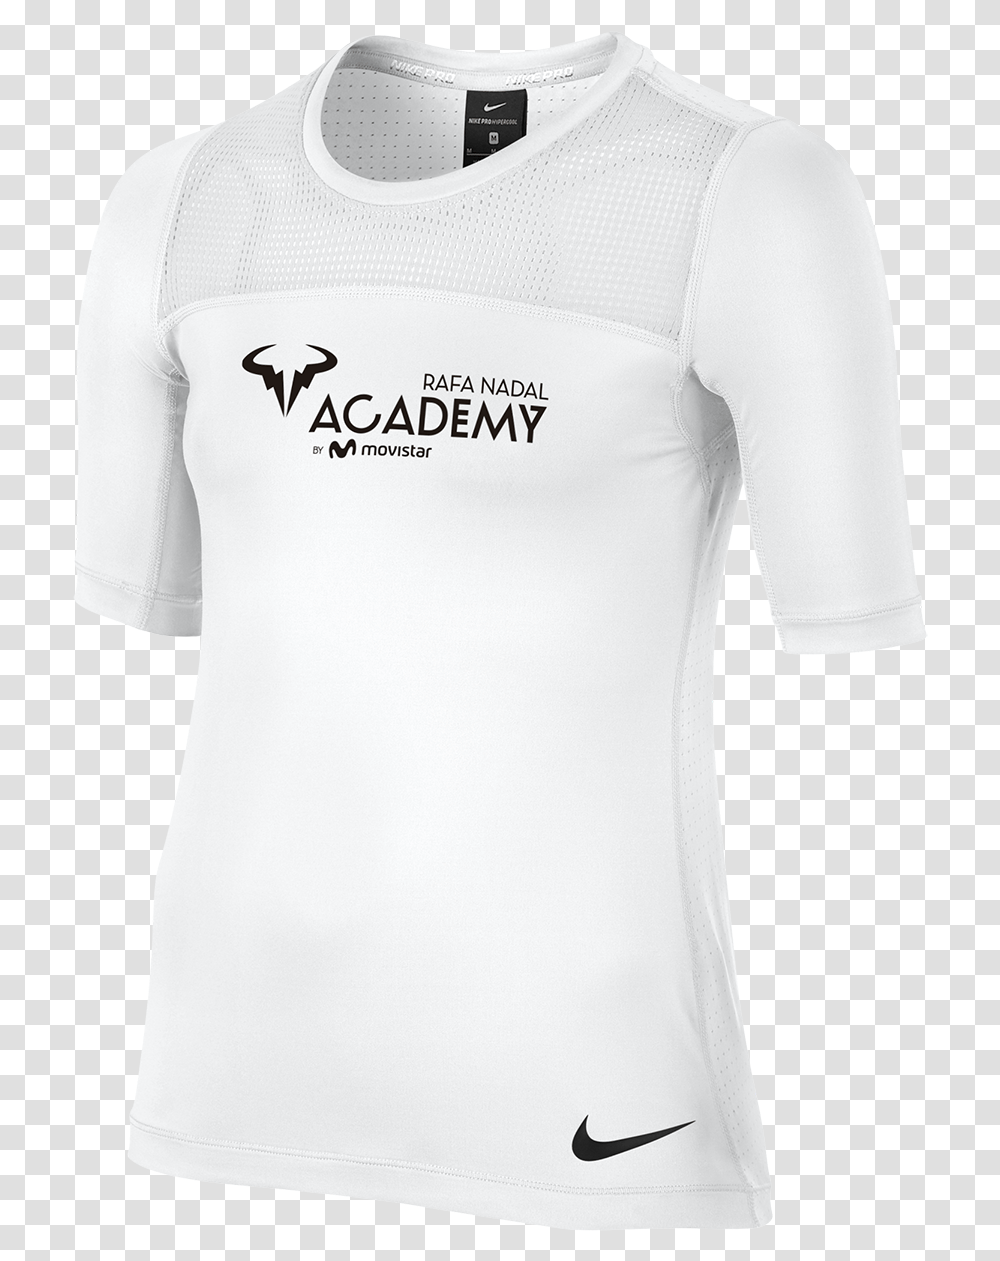 Download Hd White Clean White T Shirt Penguin White Polo Shirt, Sleeve, Long Sleeve, Jersey Transparent Png